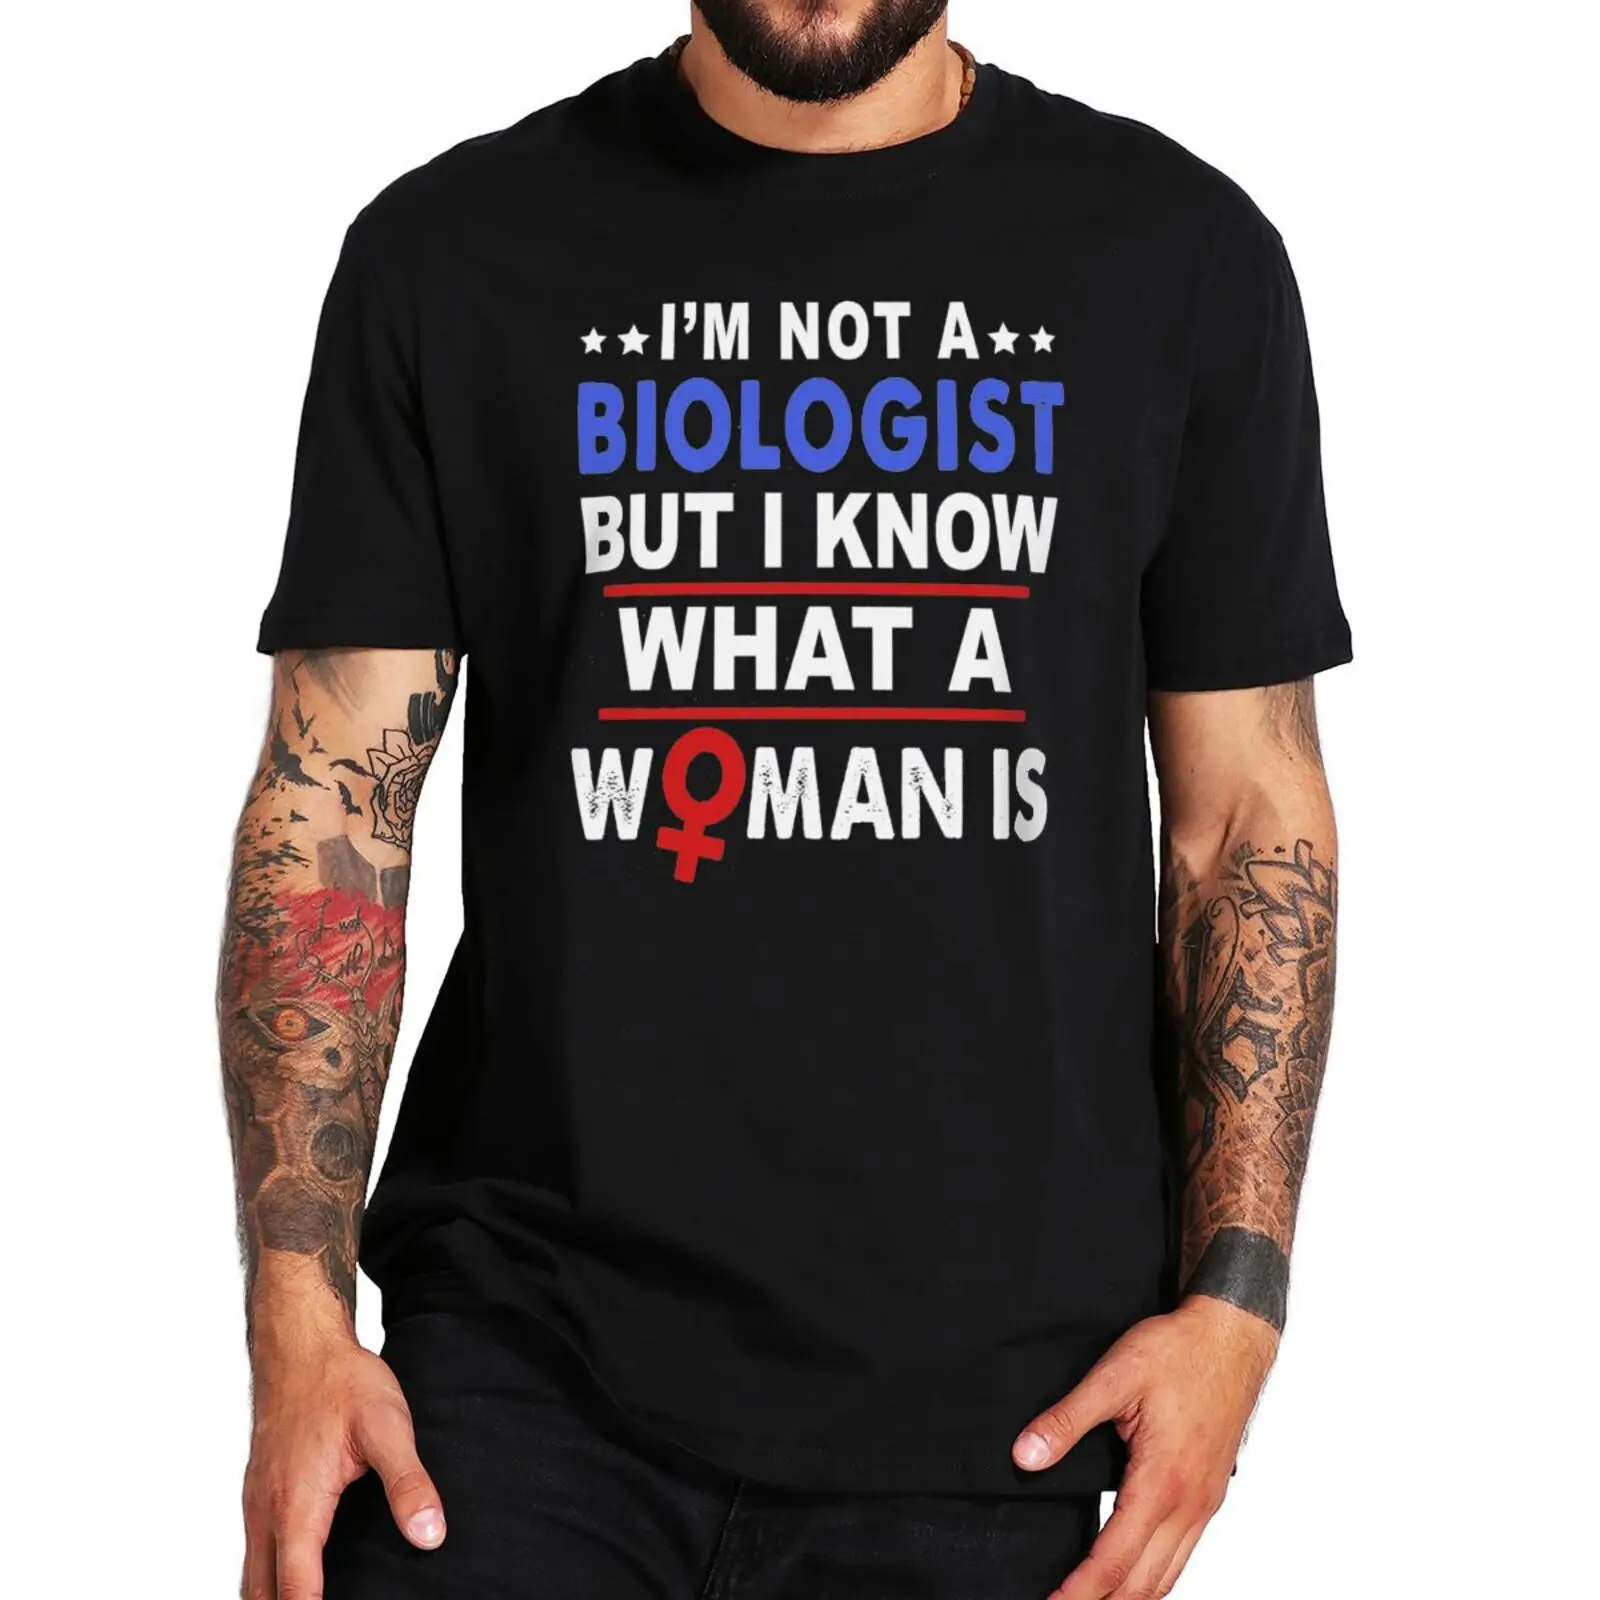 

I'm Not A Biologist But I Know What A Woman Is T-Shirt 2022 Funny Conservative Memes Unisex Tee Casual Cotton Premium T Shirt